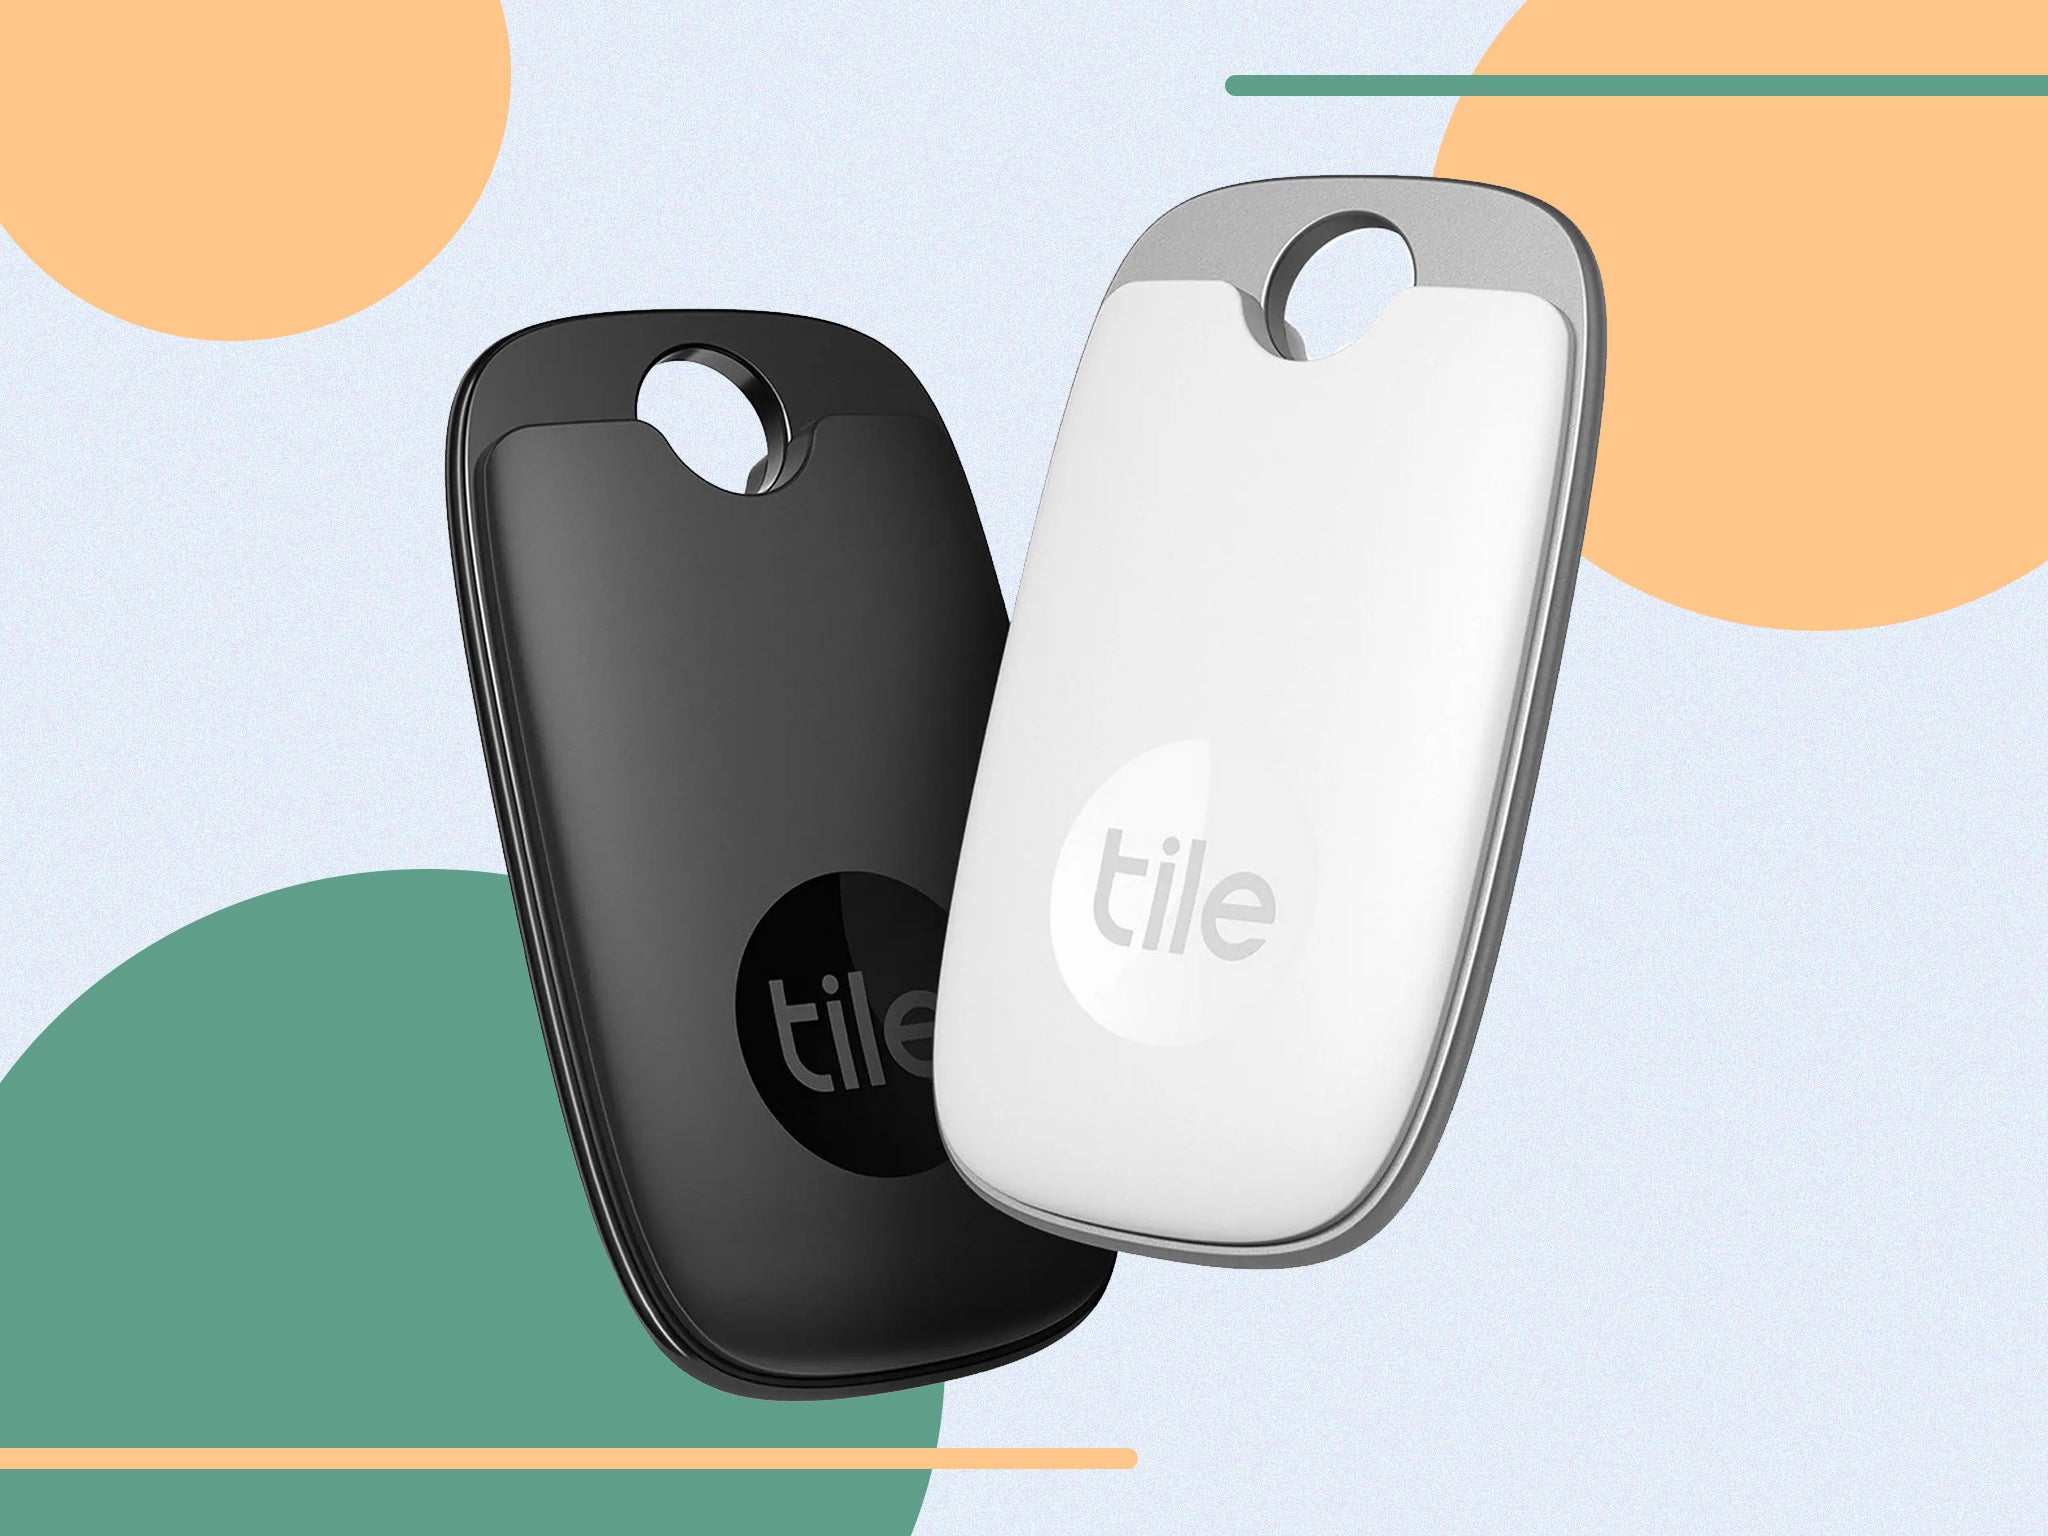 Tile pro key finder review: Bluetooth tracker for iPhone and